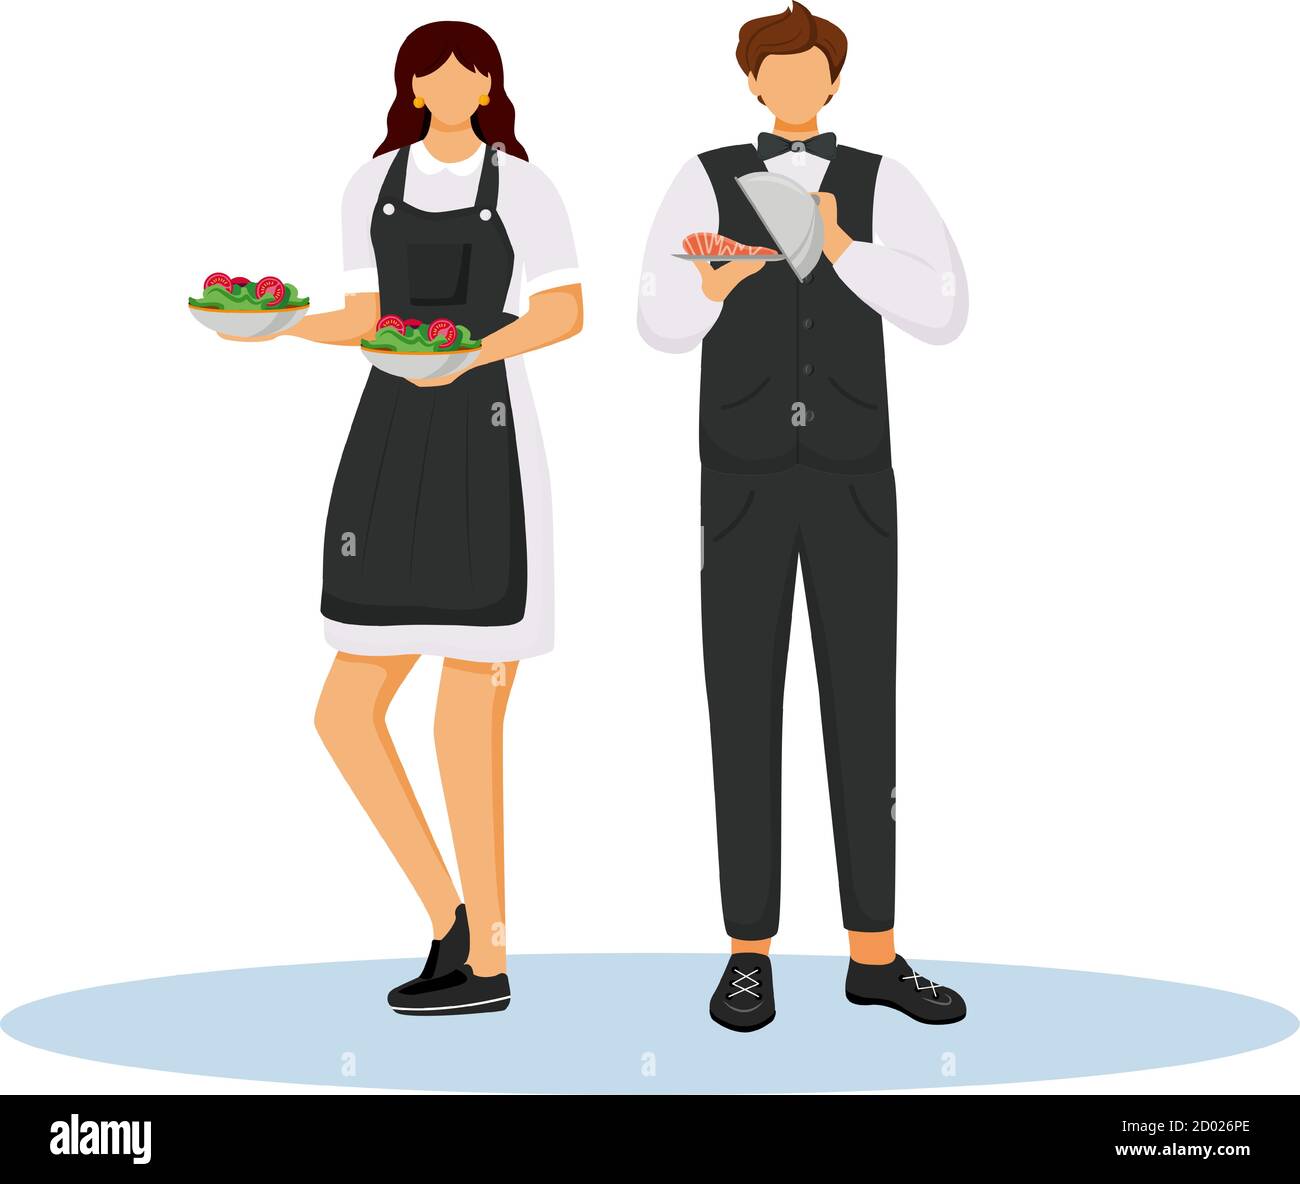 Hotel waiters in uniform flat color vector illustration. Food catering service. Waitress holding vegetable salads. Restaurant workers with dishes Stock Vector